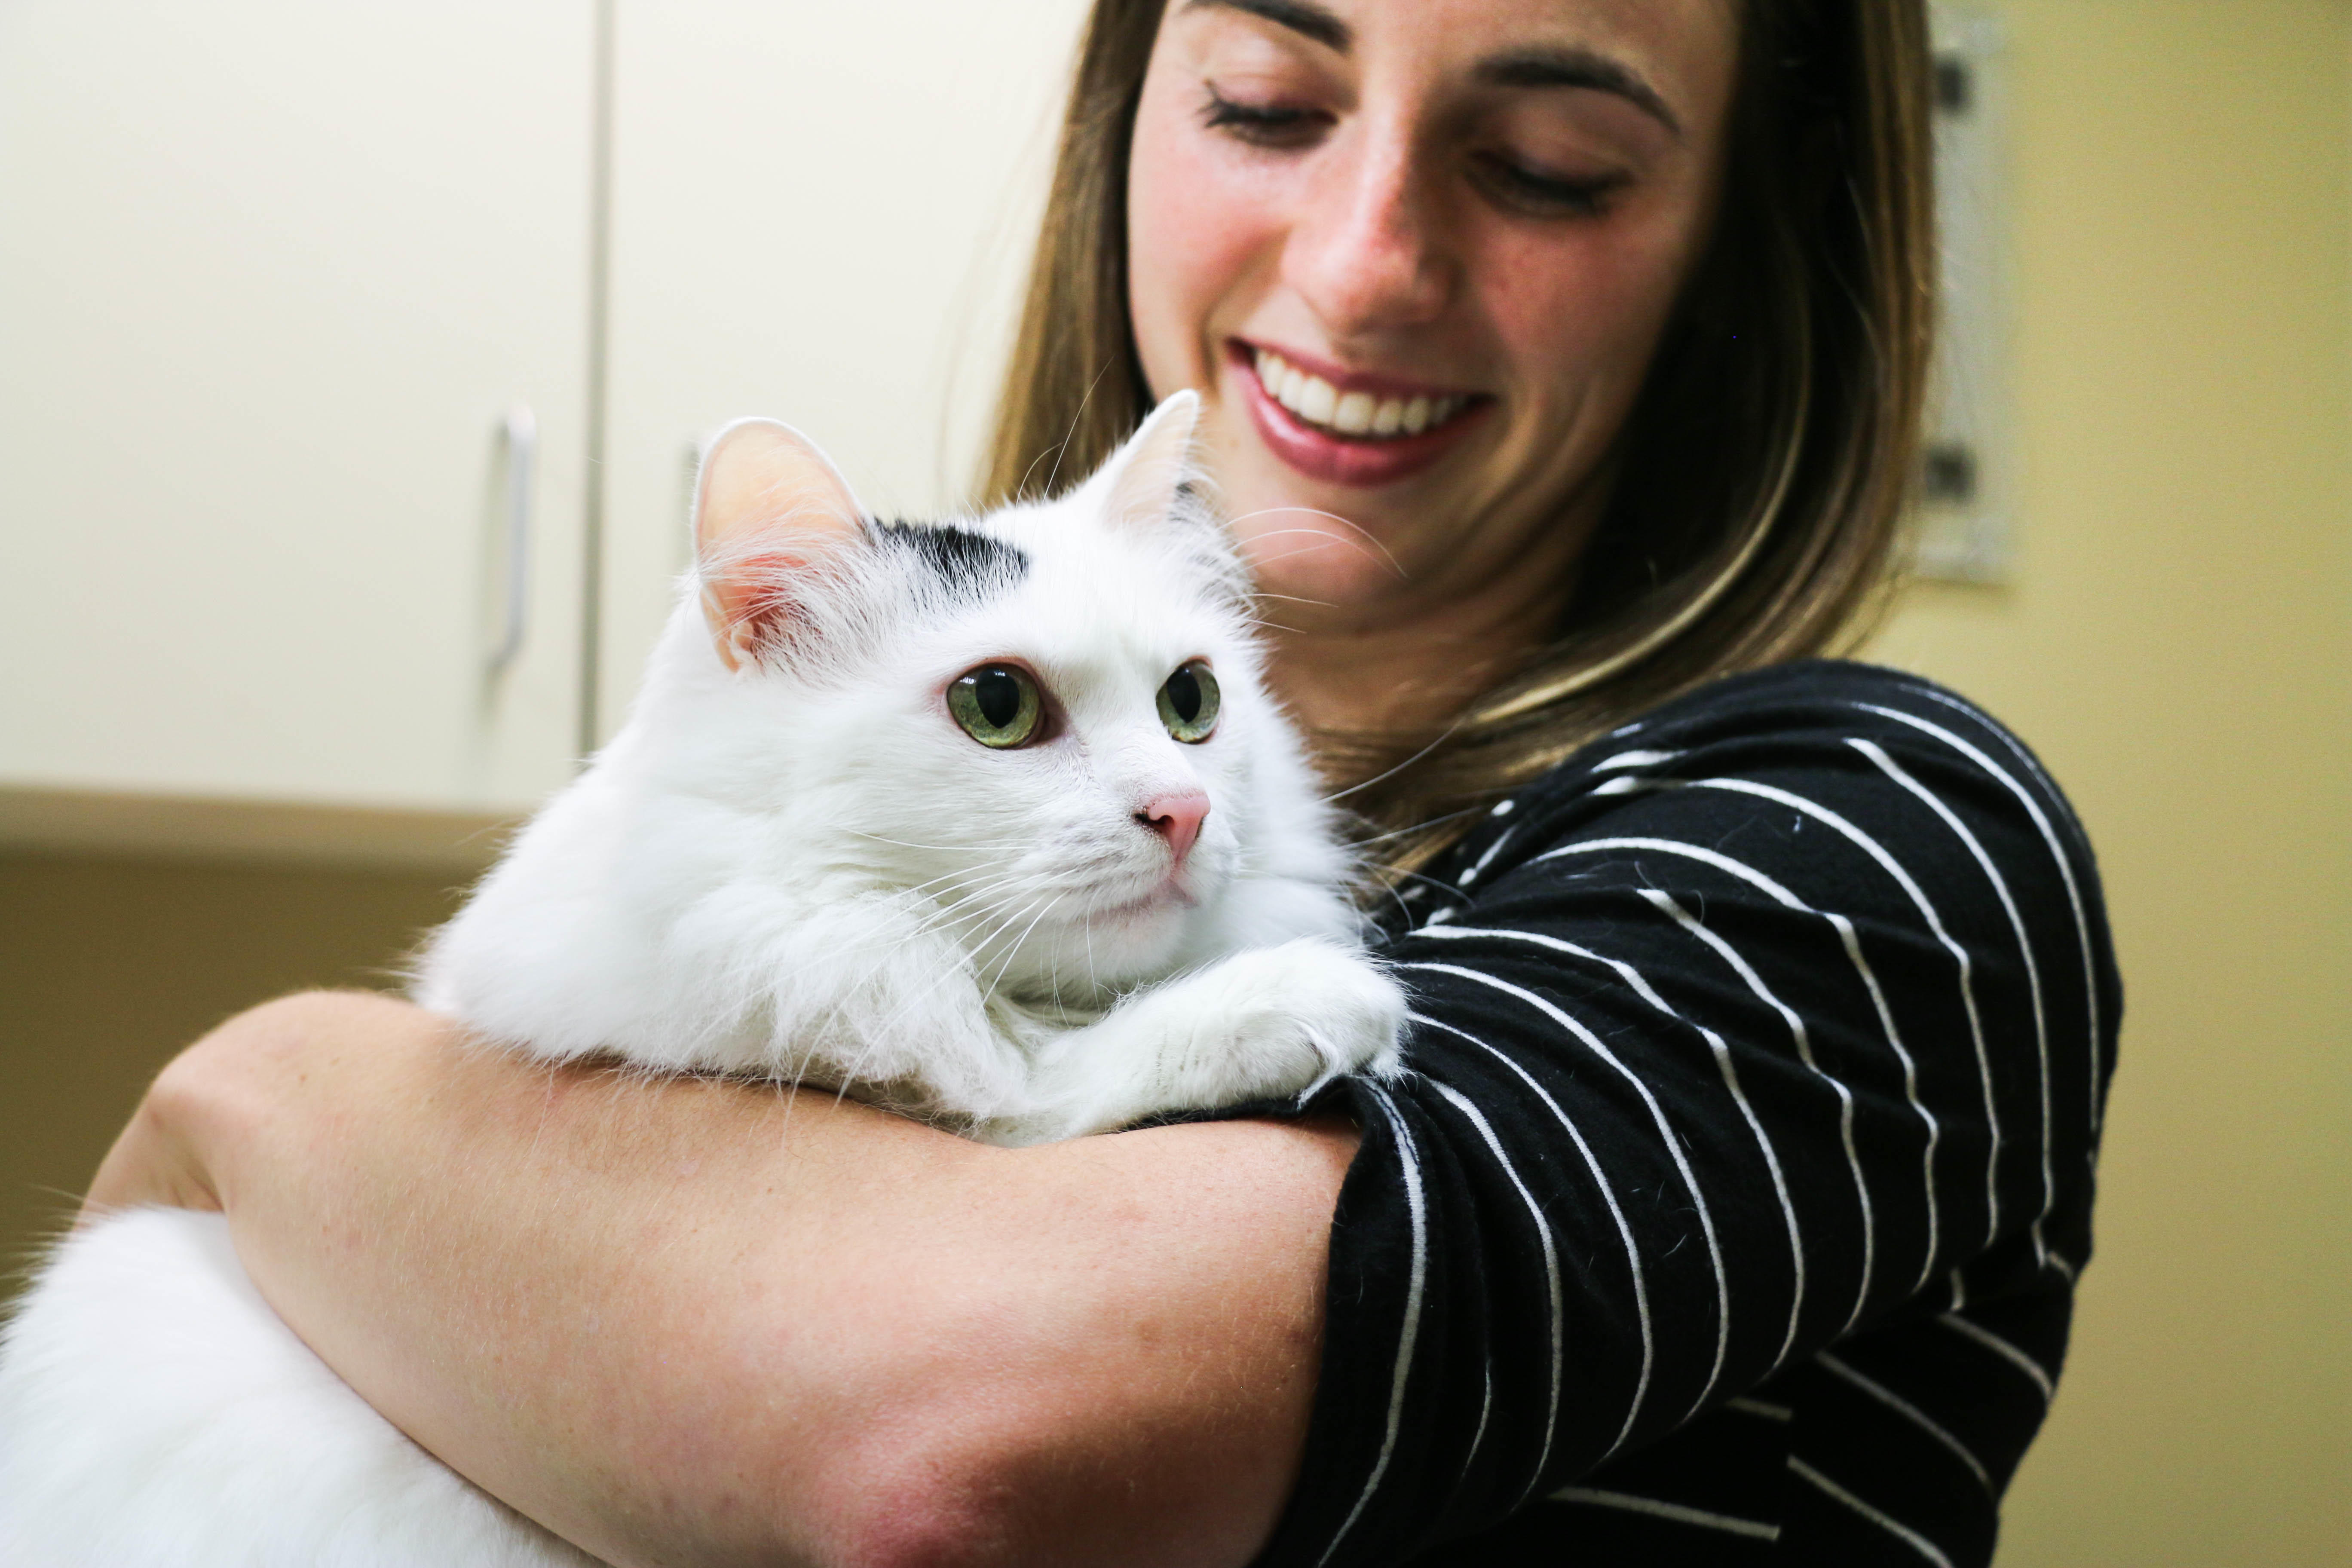 Dr. Madeline Hammond snuggles one her of feline patients